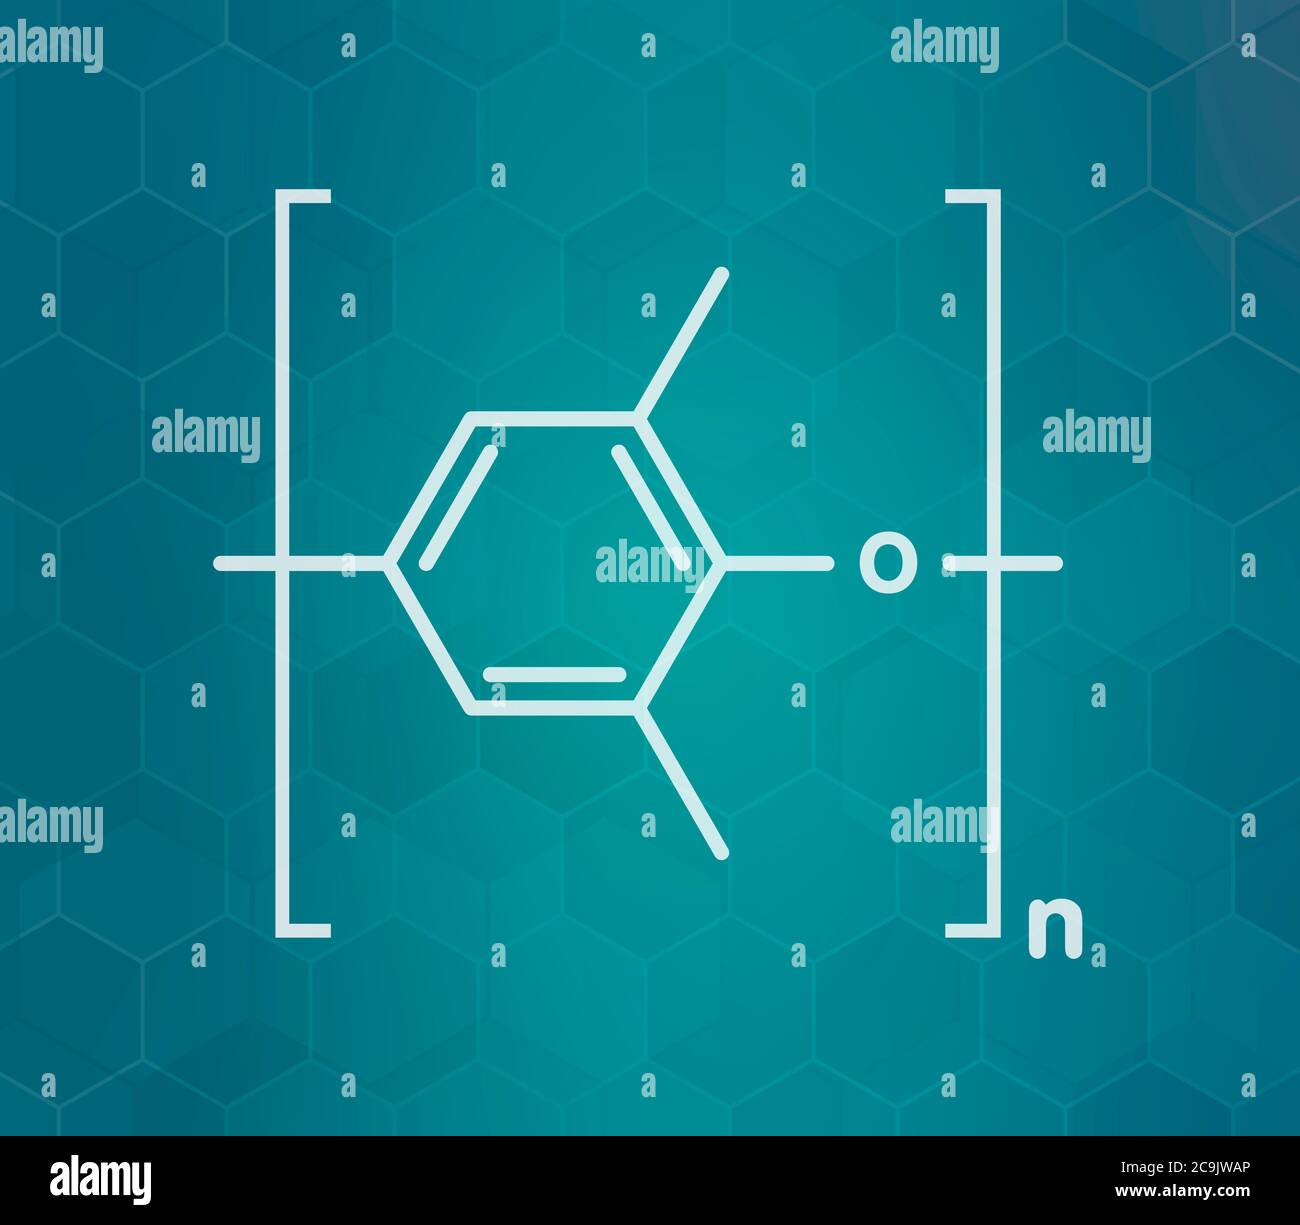 Poly(p-phenylene oxide) (PPO) polymer, chemical structure. Also known as poly(p-phenylene ether) or PPE. White skeletal formula on dark teal gradient Stock Photo